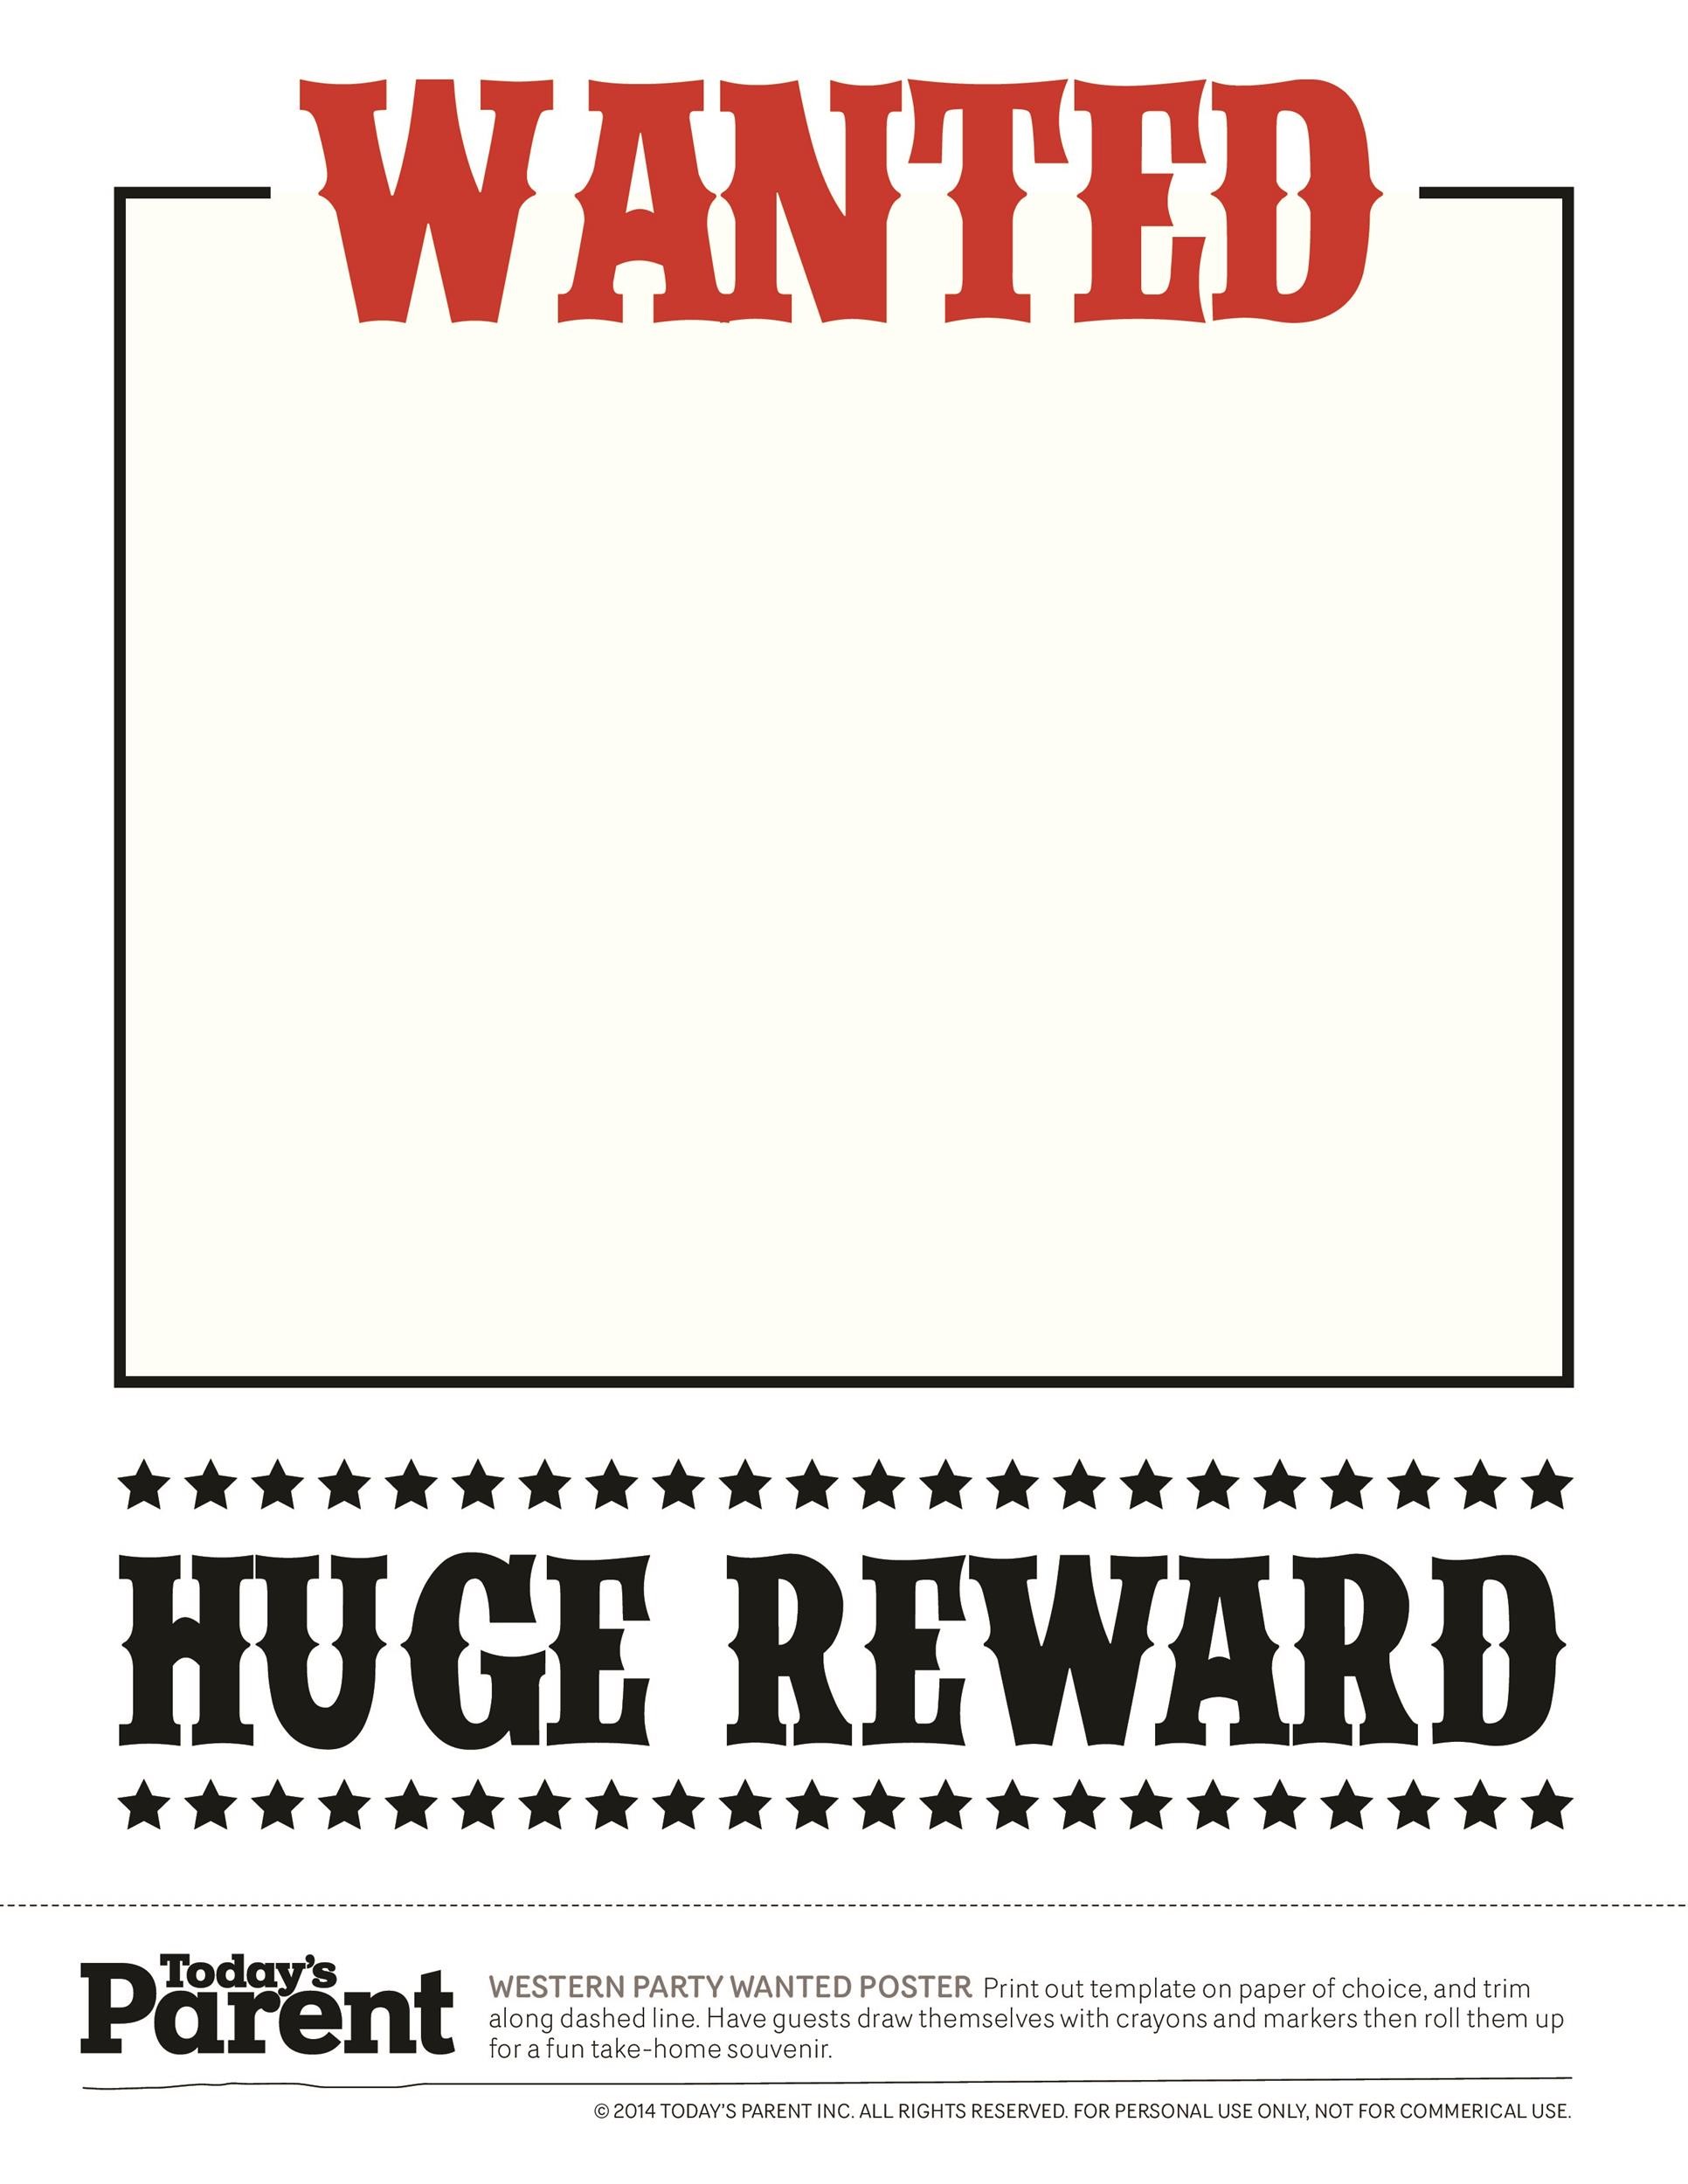 Old West Wanted Poster Template